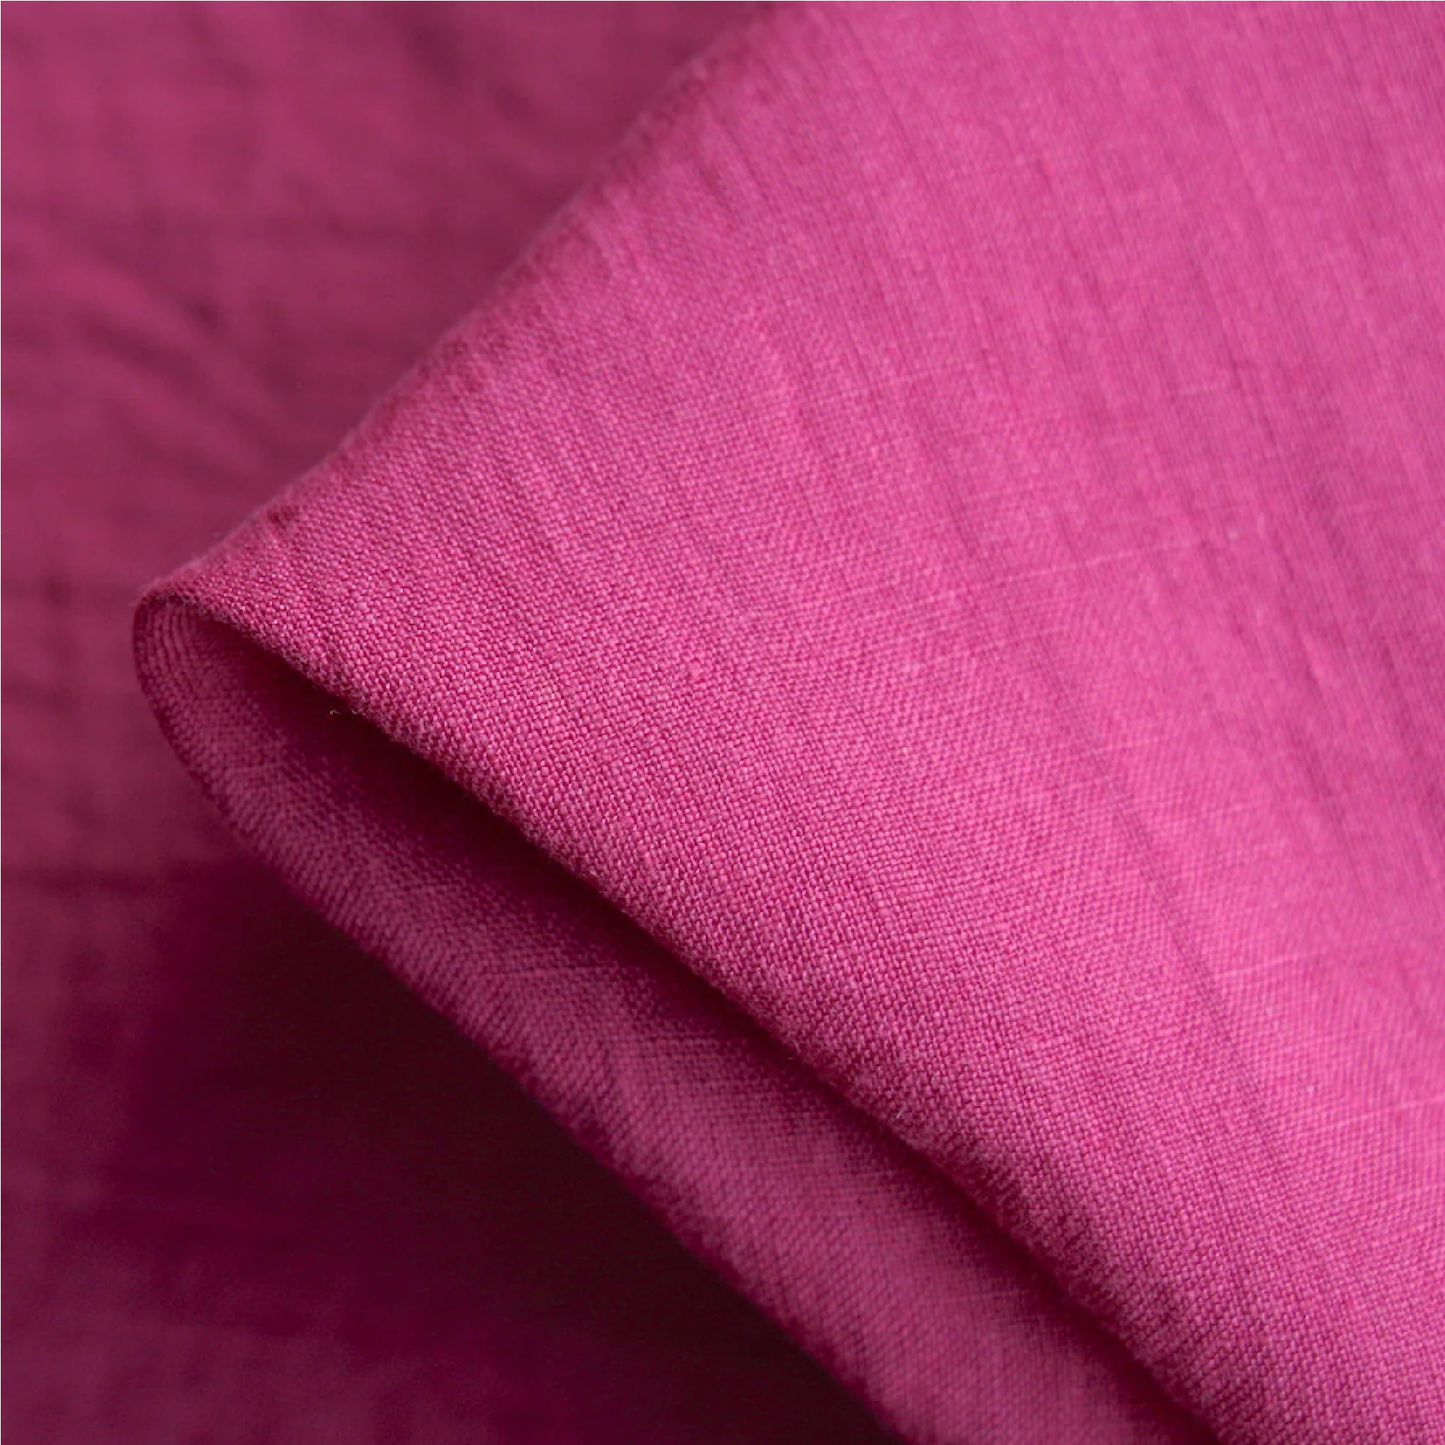 Linen Fabric 100% softened, stonewashed, 145cm / 57 inches width linen fabric for bedding and clothing, DIY sewing gift, 13 colors available